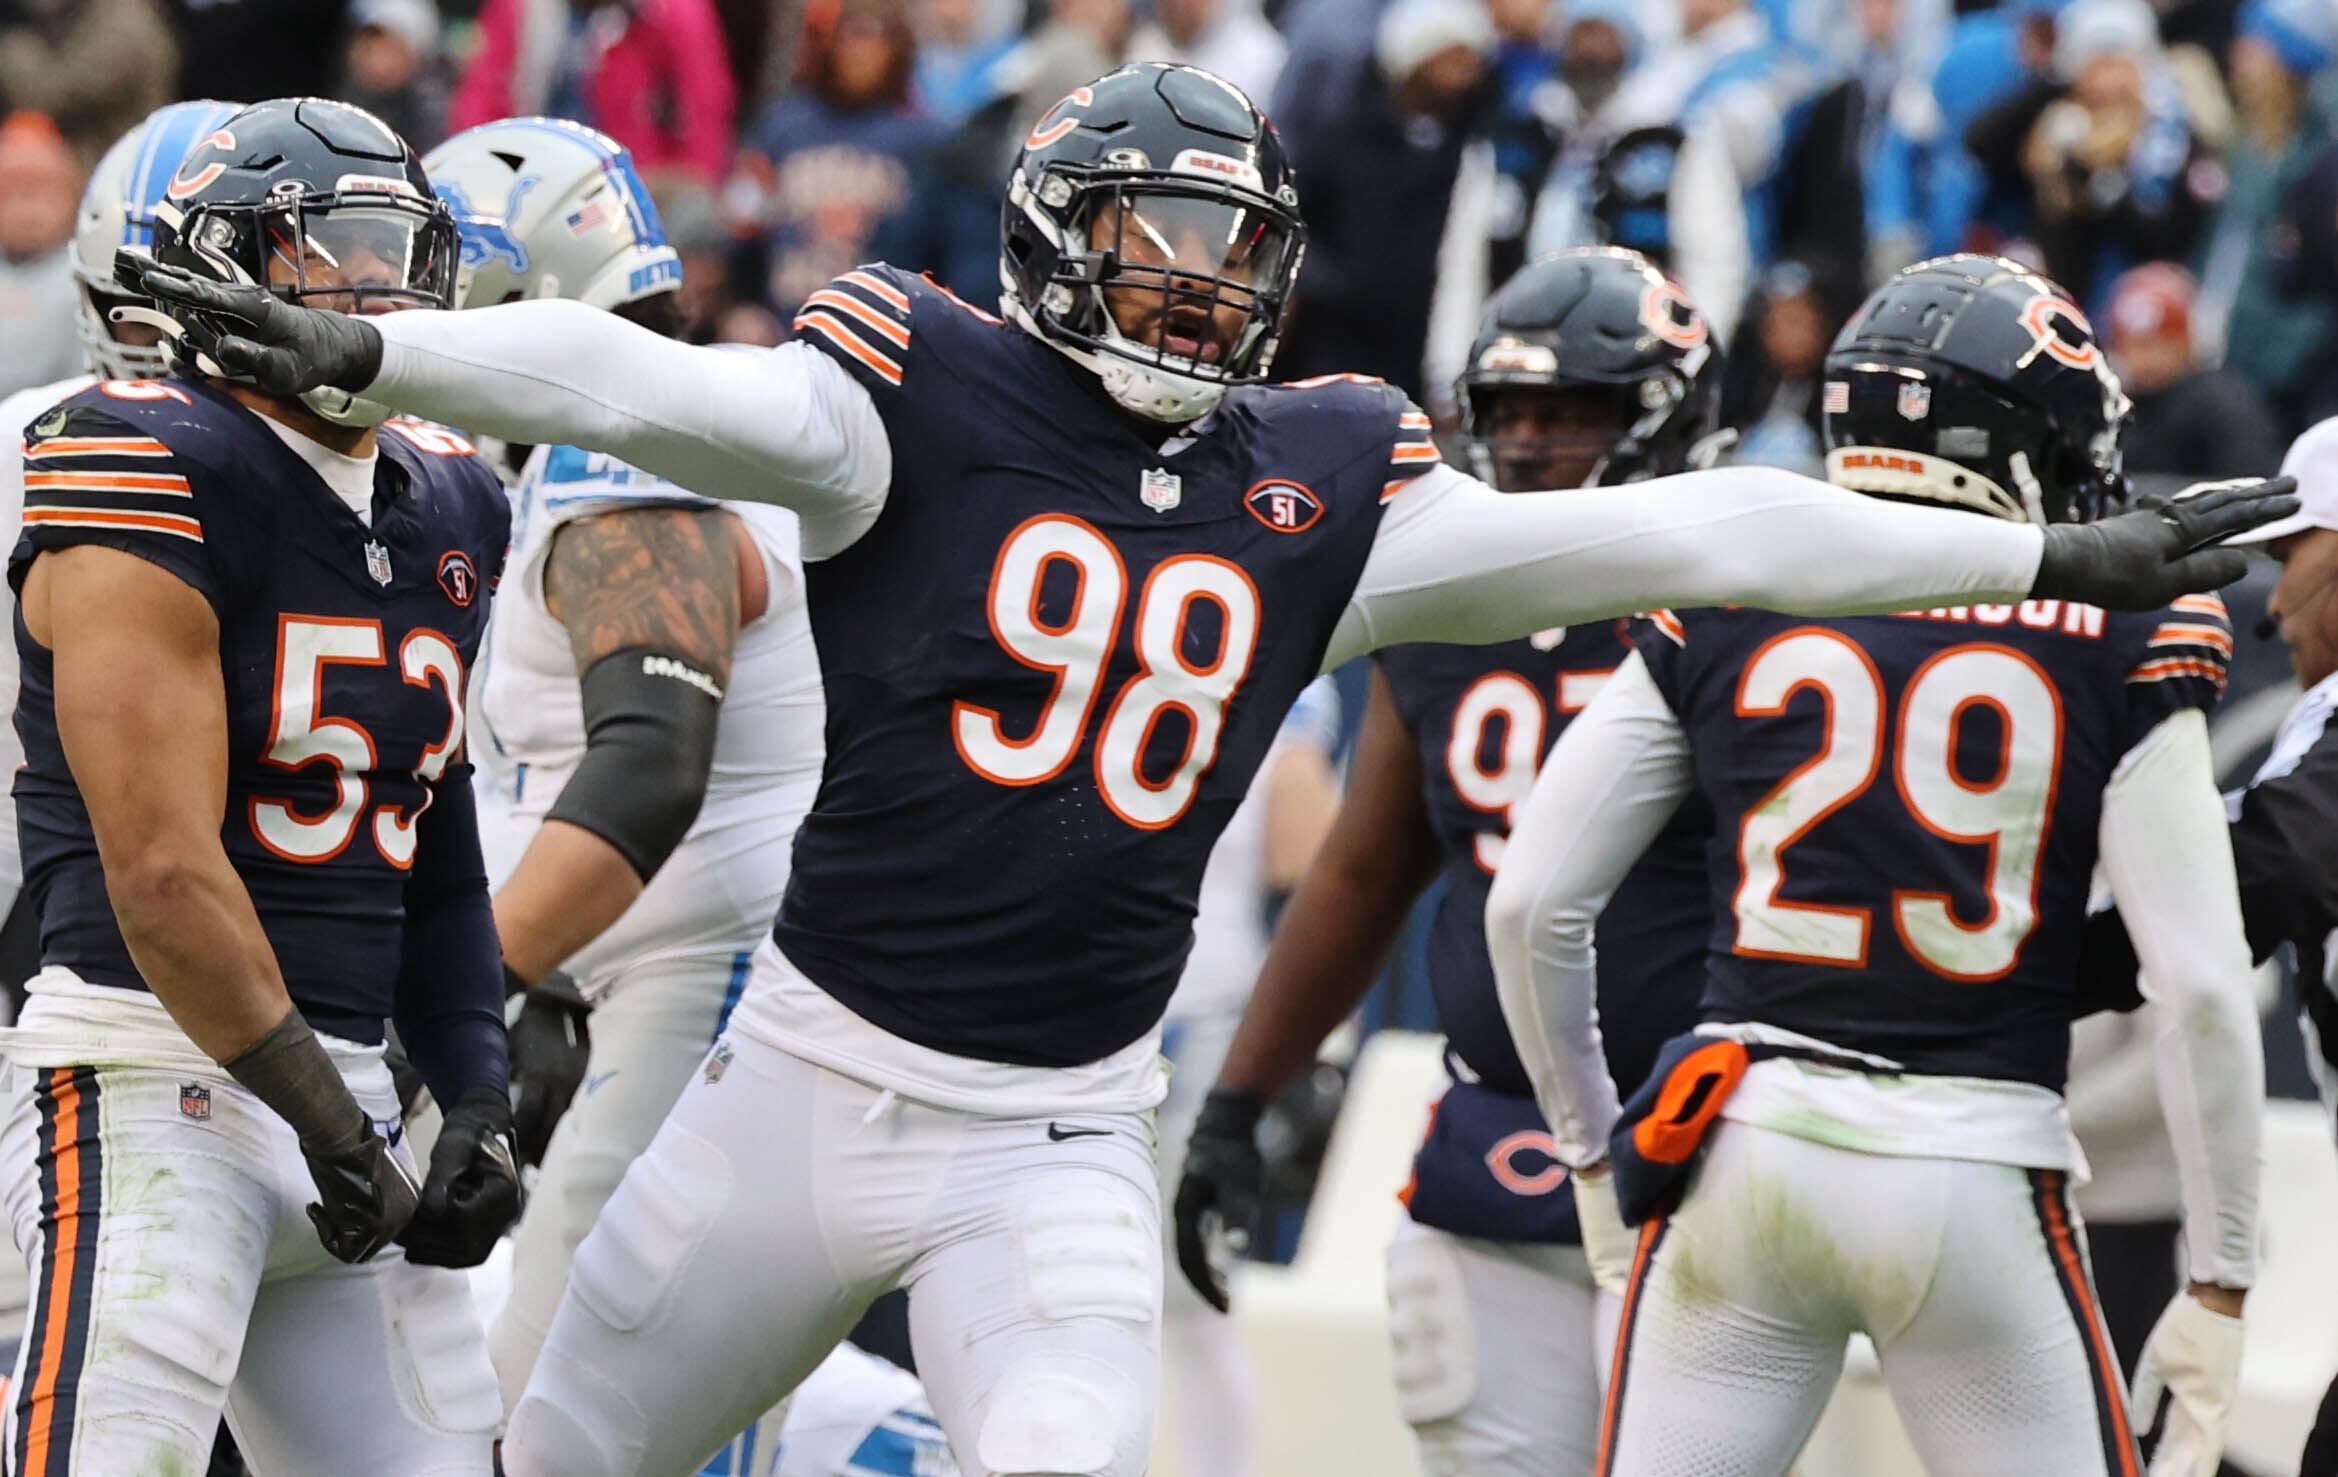 Chicago Bears defensive end Montez Sweat celebrates after stopping the Detroit Lions on fourth down late in their game Sunday at Soldier Field in Chicago.